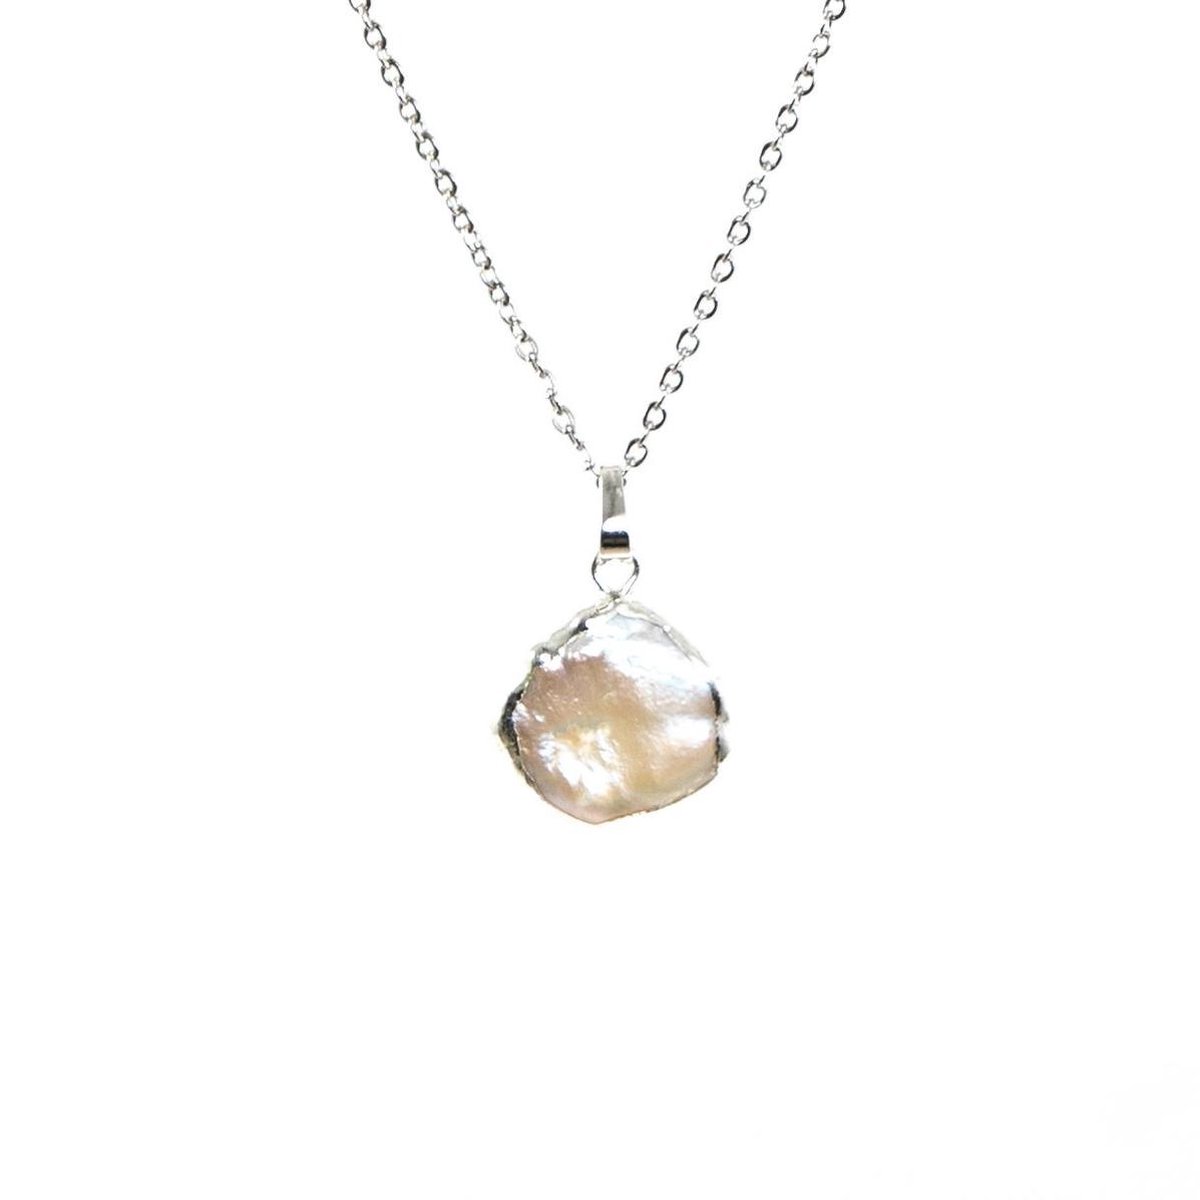 Lunar Wolff - Freshwater Pearl Necklace - Silver